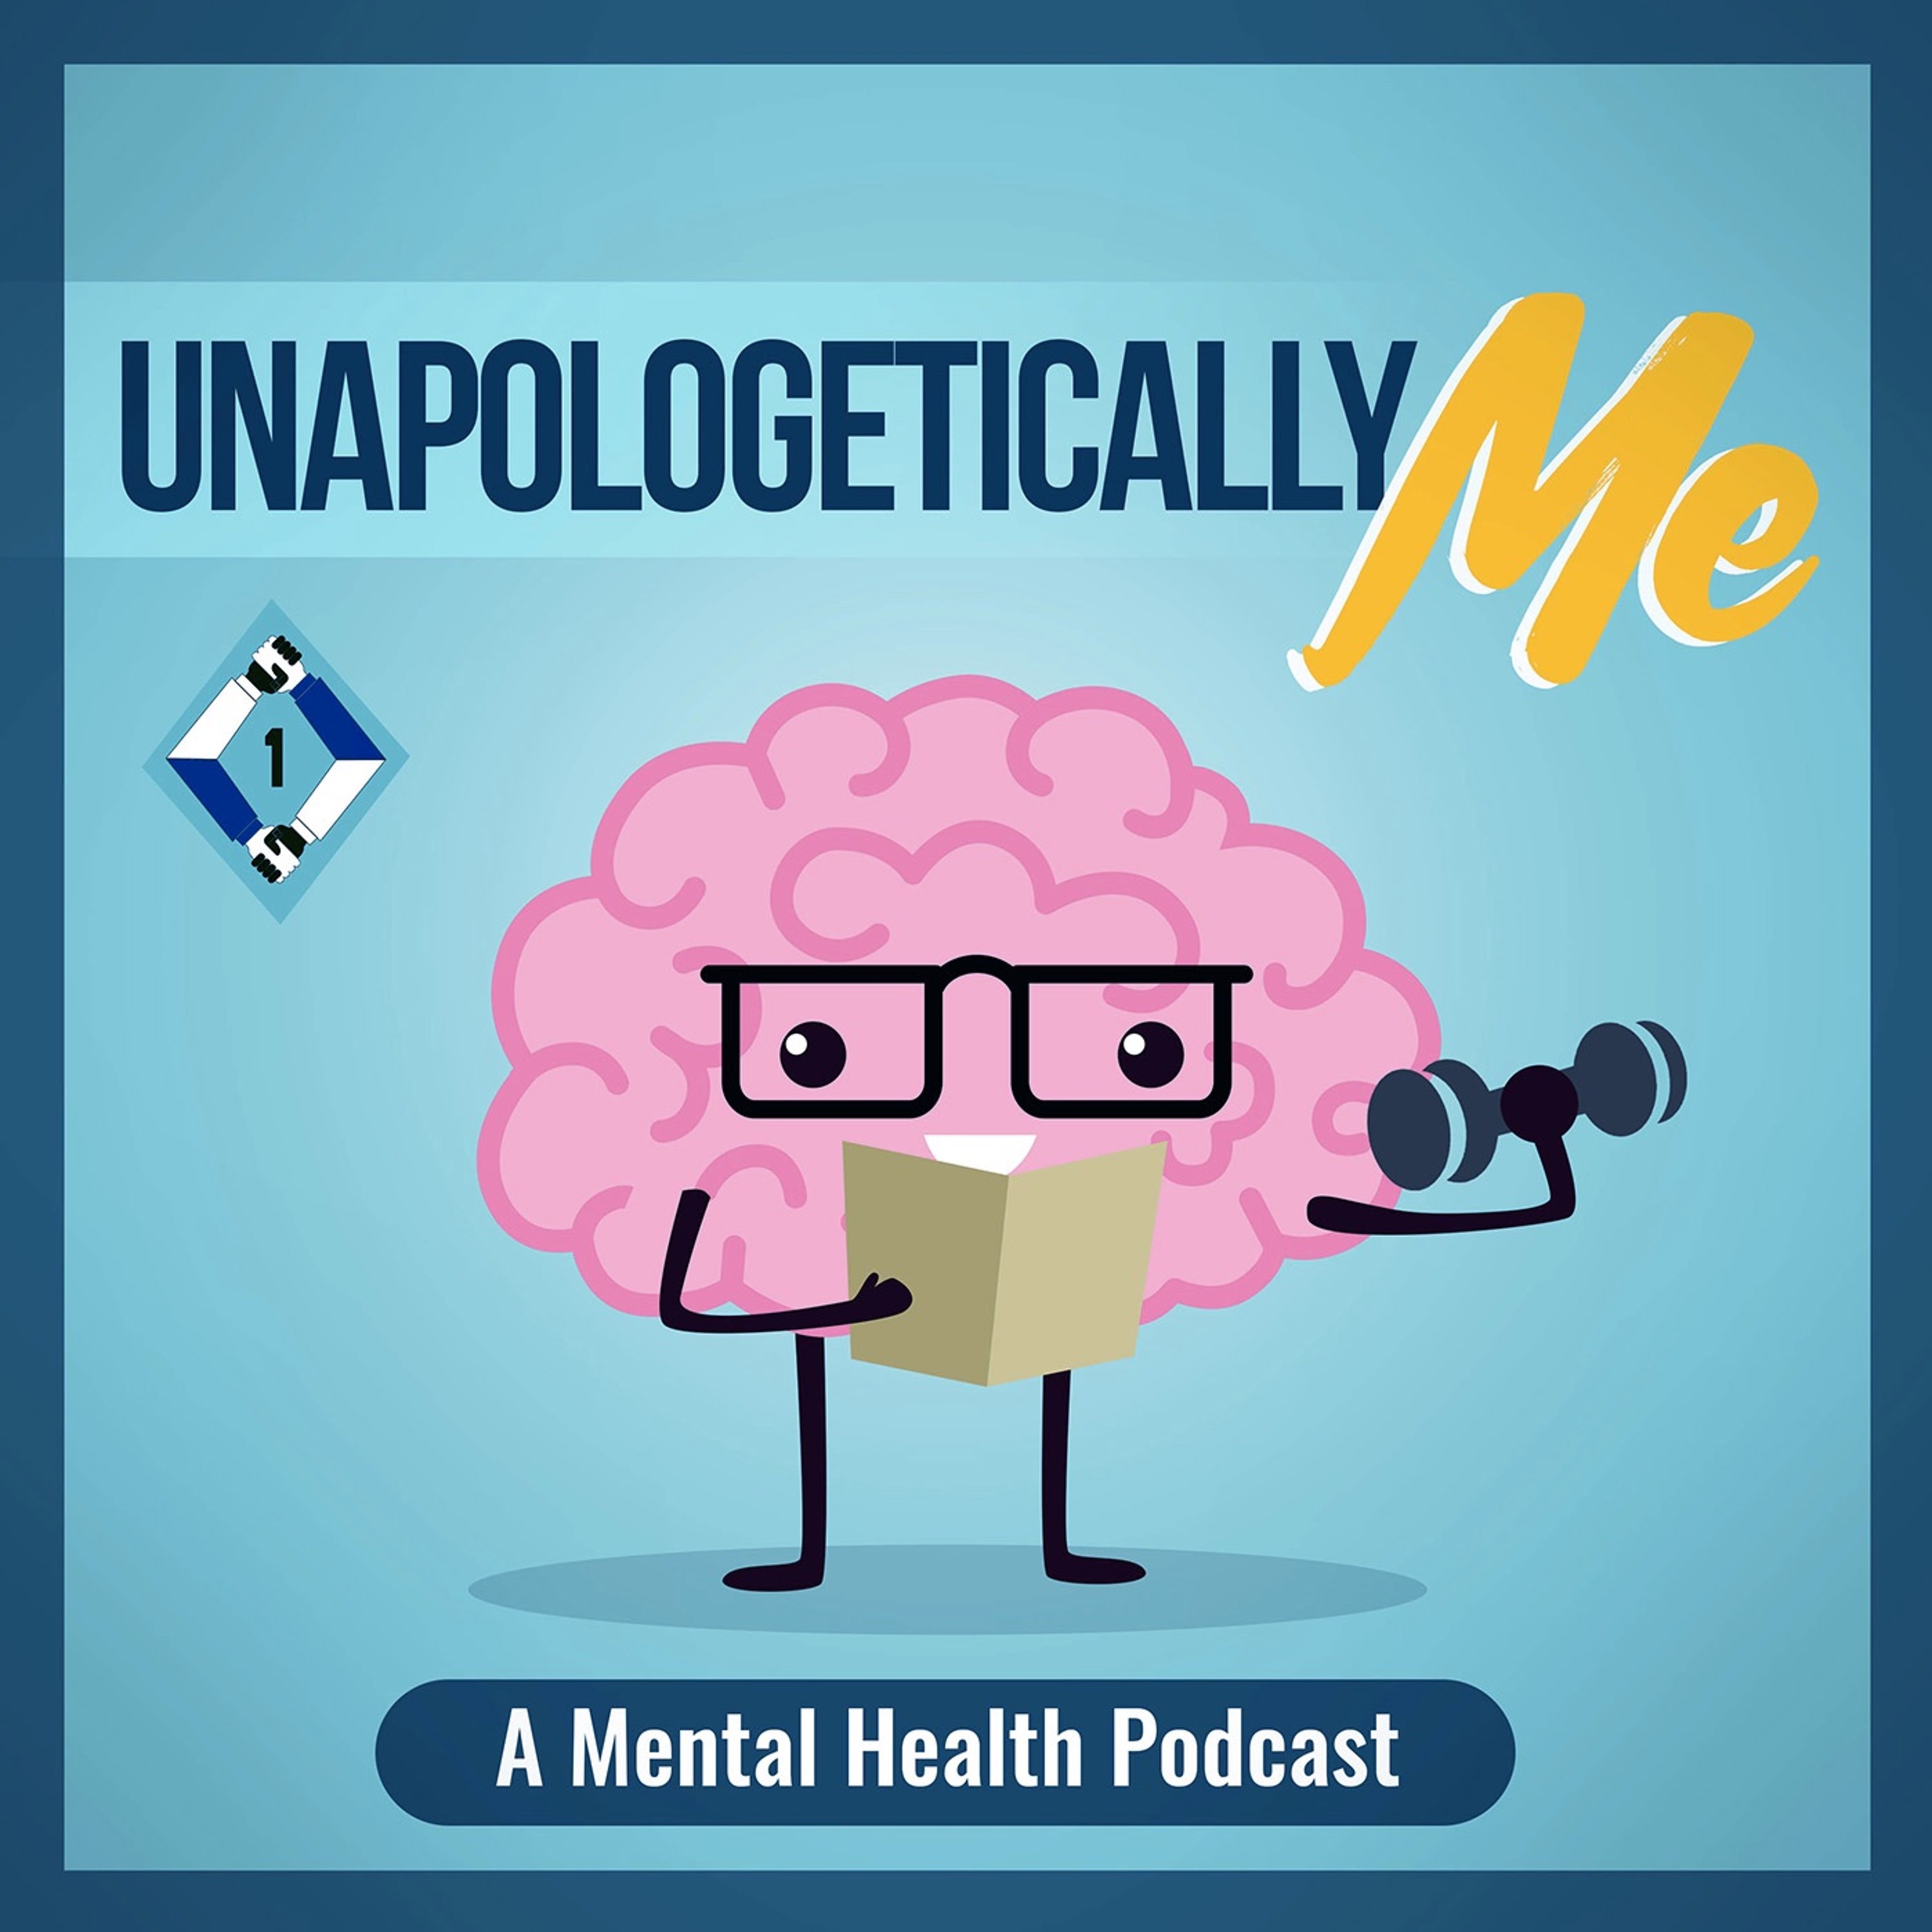 Unapologetically Me: A Mental Health Podcast - Your Mental Health Workout